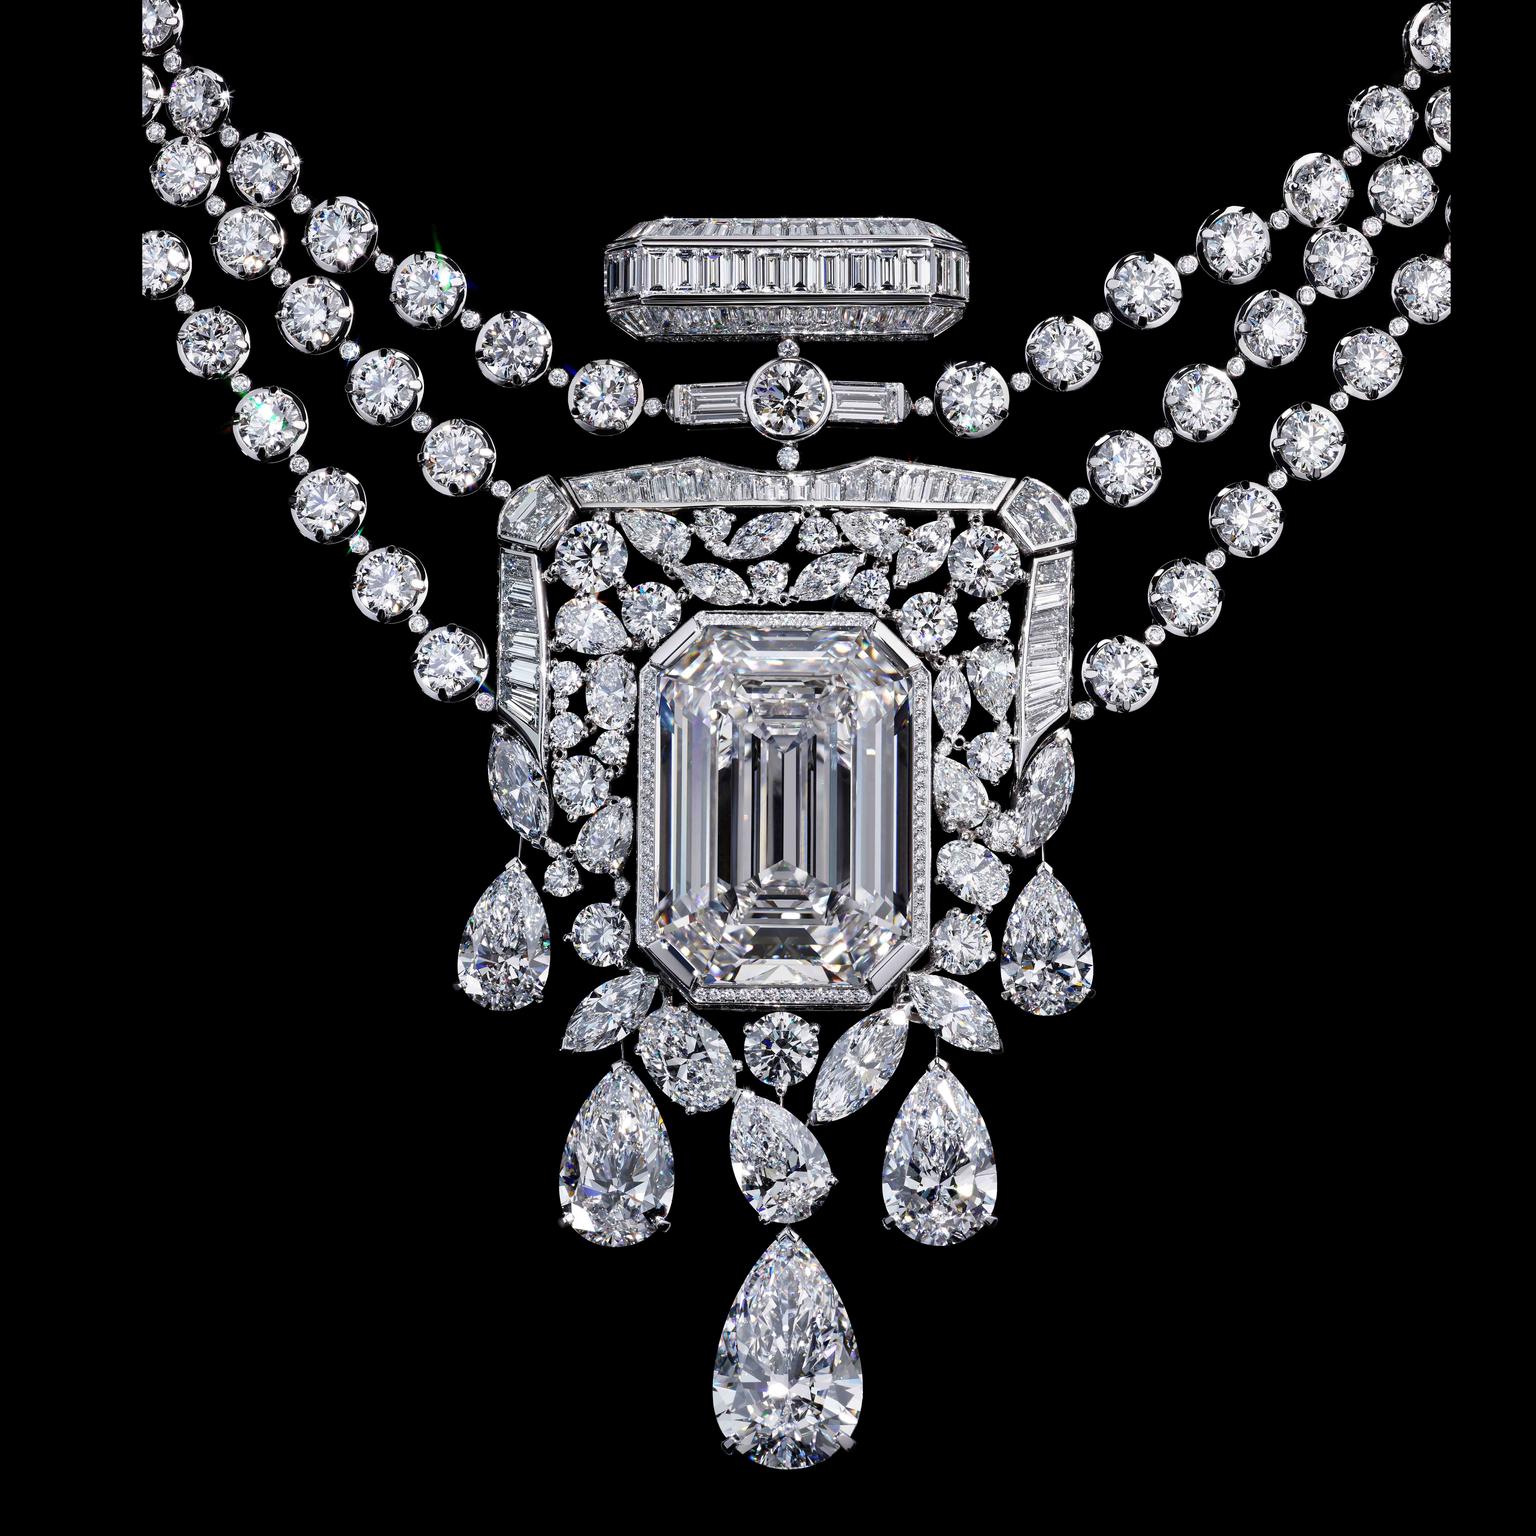 No5 high jewellery necklace by Chanel close-up